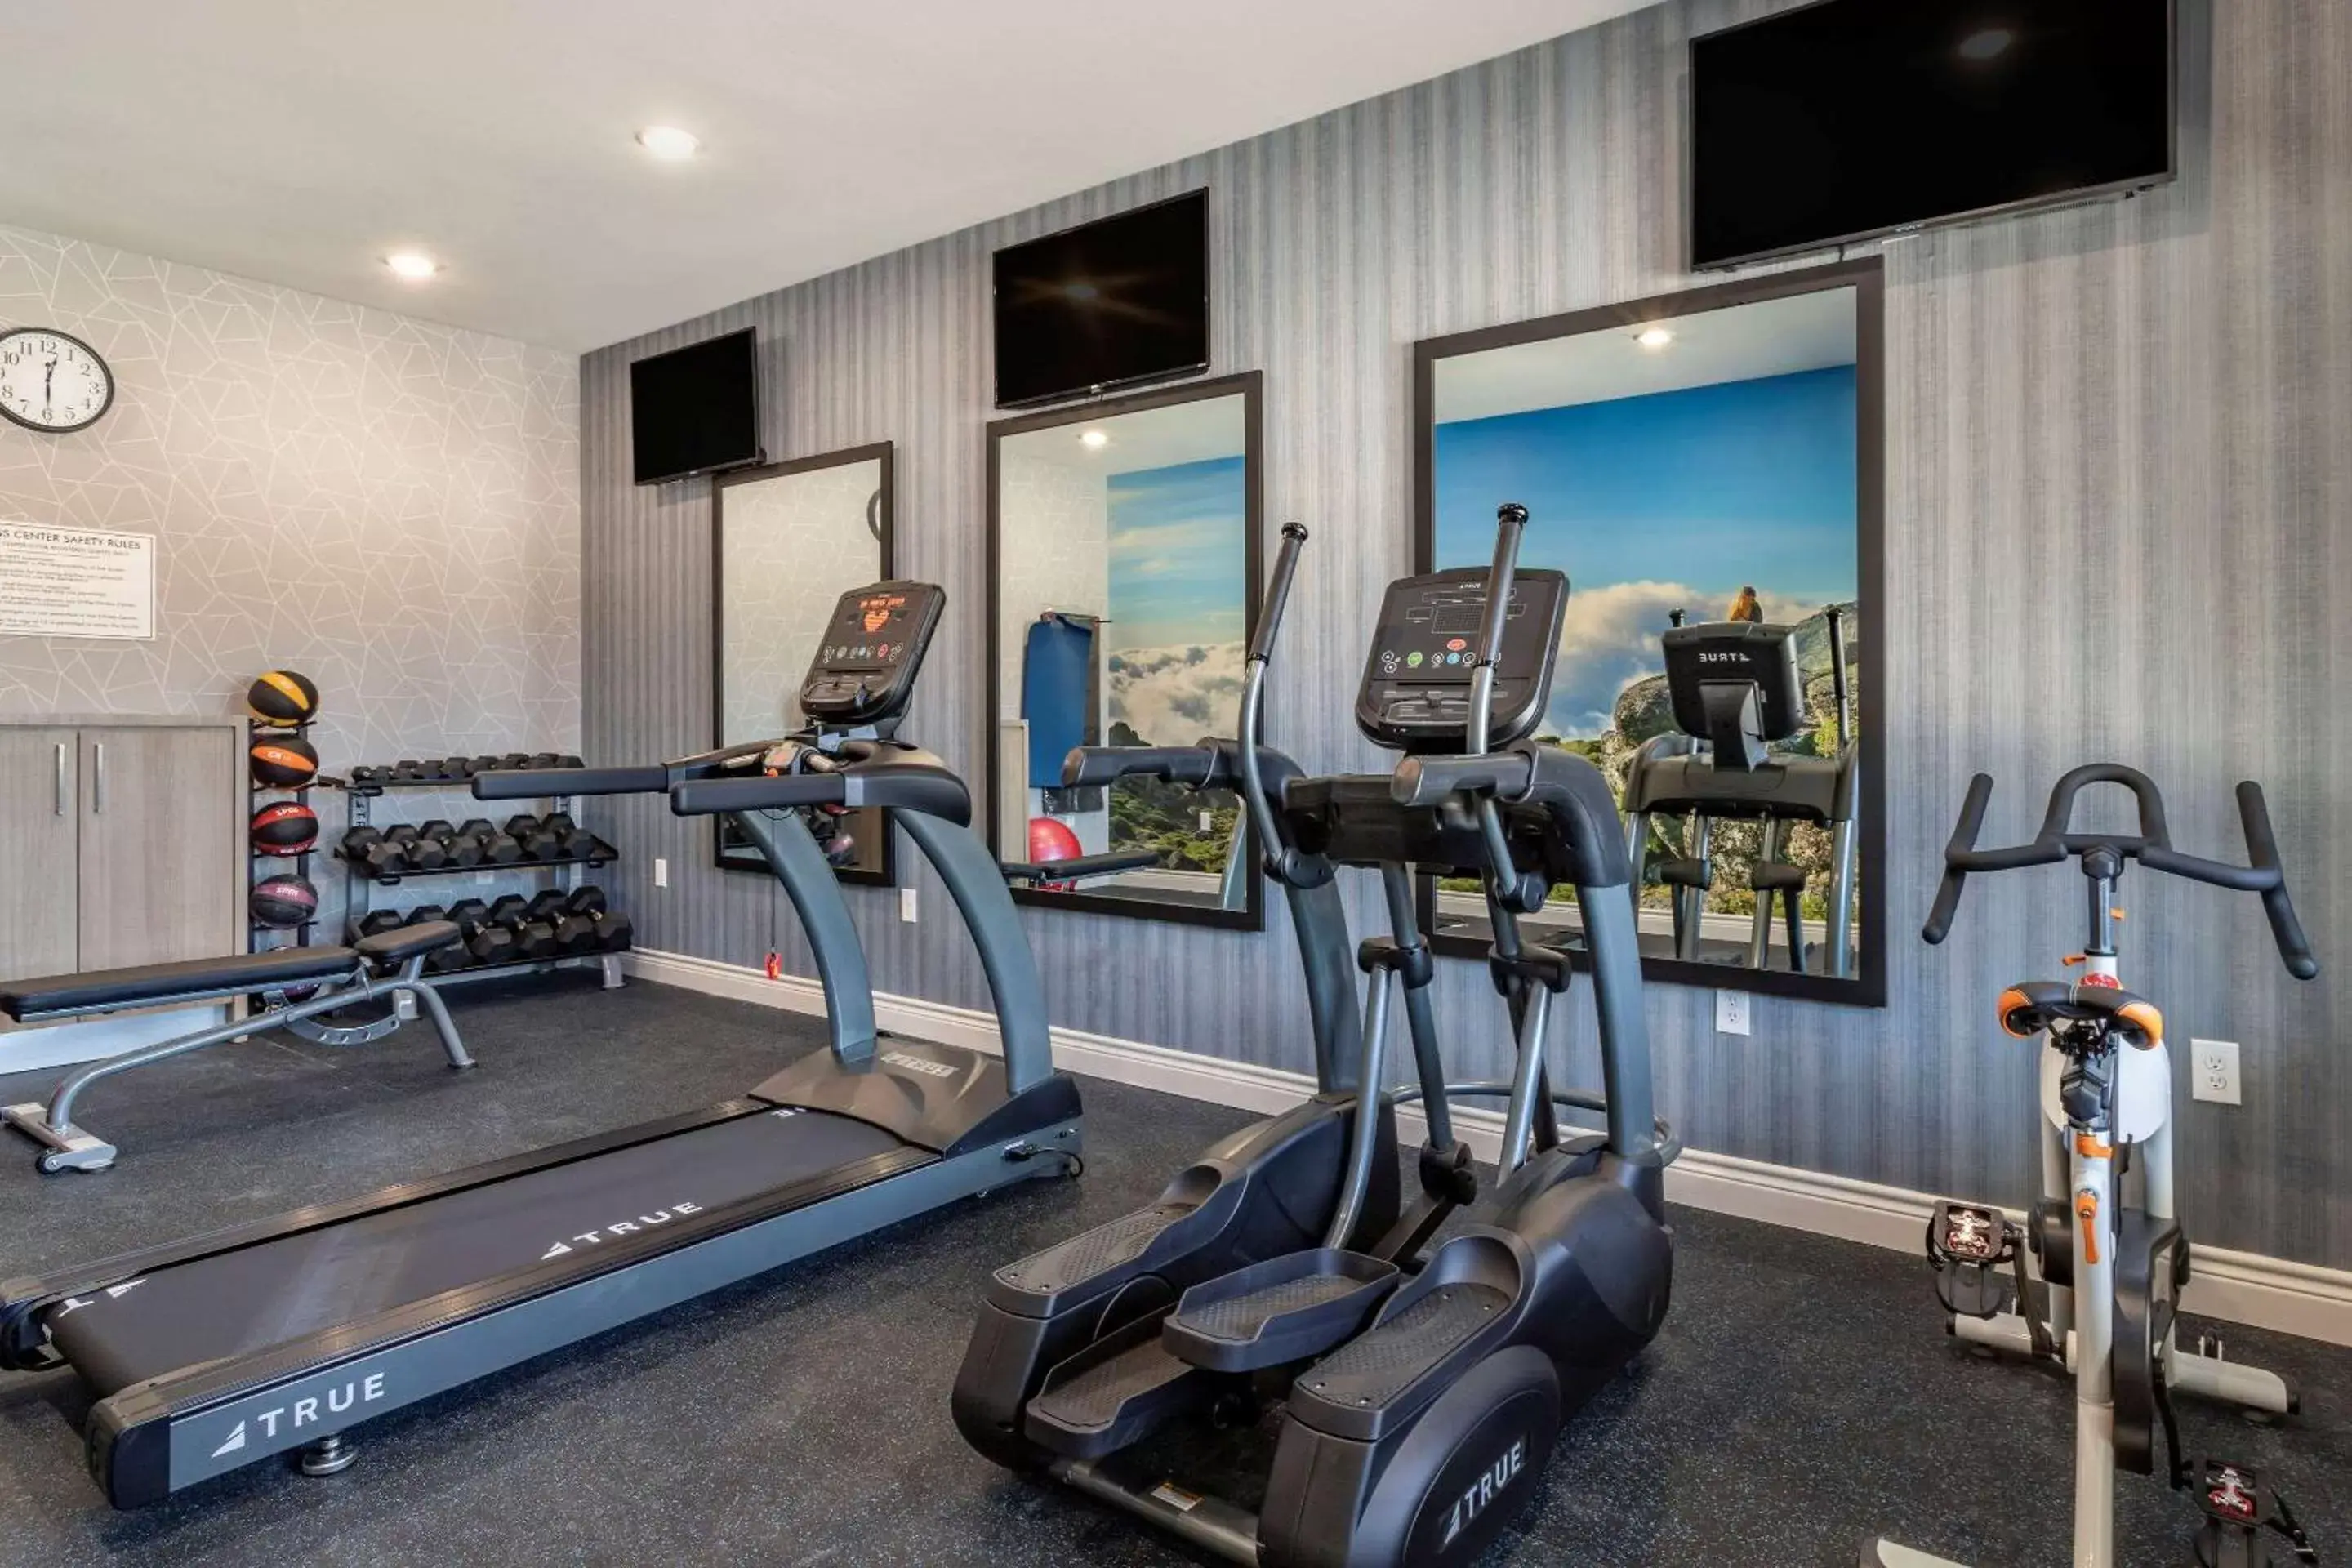 Fitness centre/facilities, Fitness Center/Facilities in Clarion Pointe Port Arthur-Beaumont South